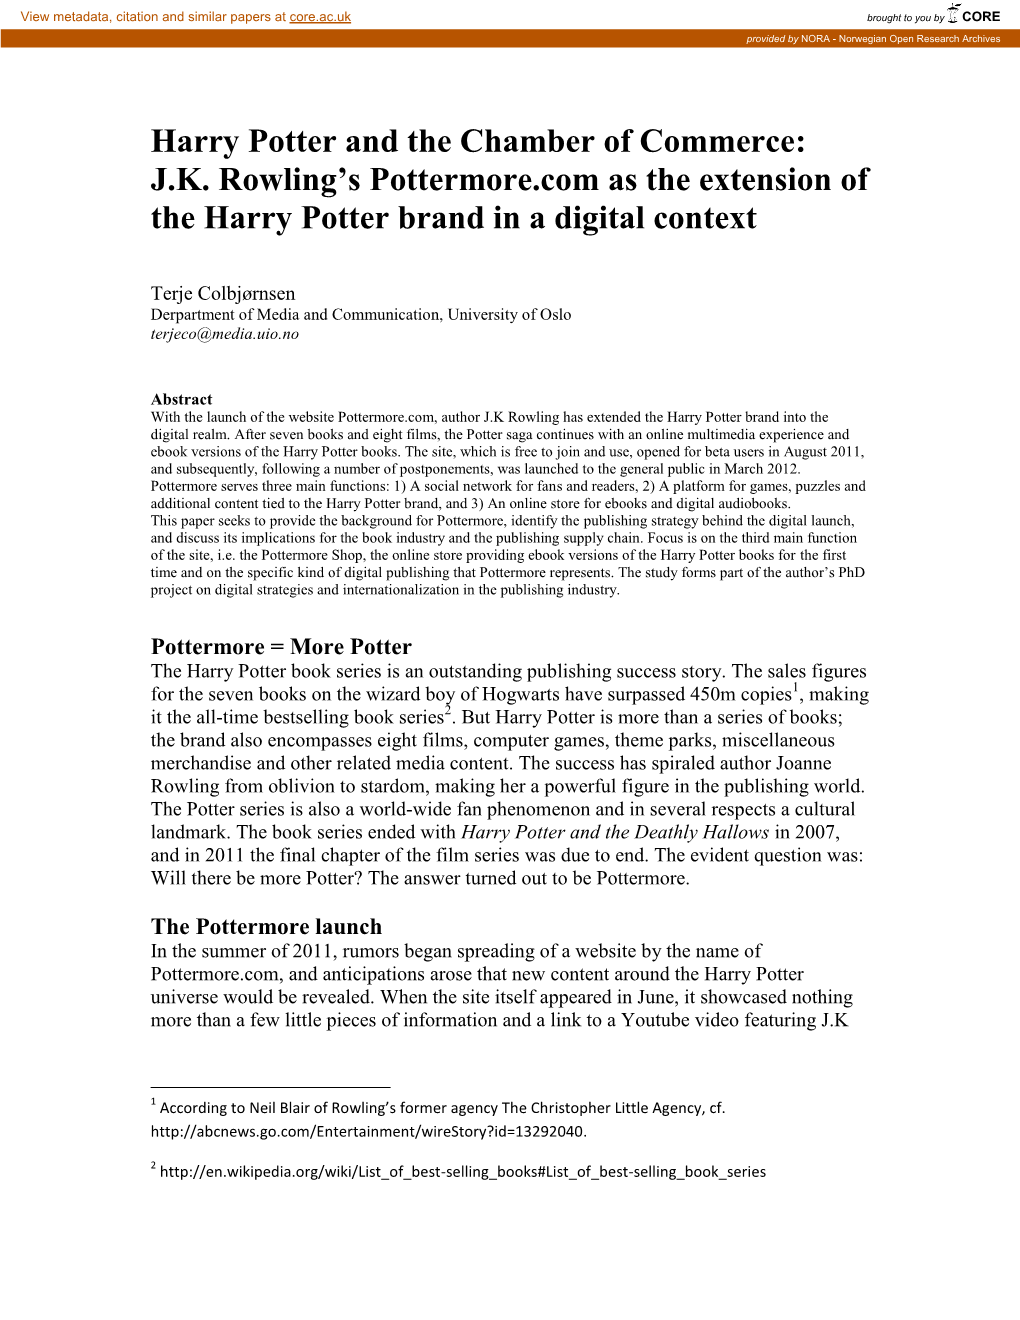 JK Rowling's Pottermore.Com As the Extension of the Harry Potter Brand